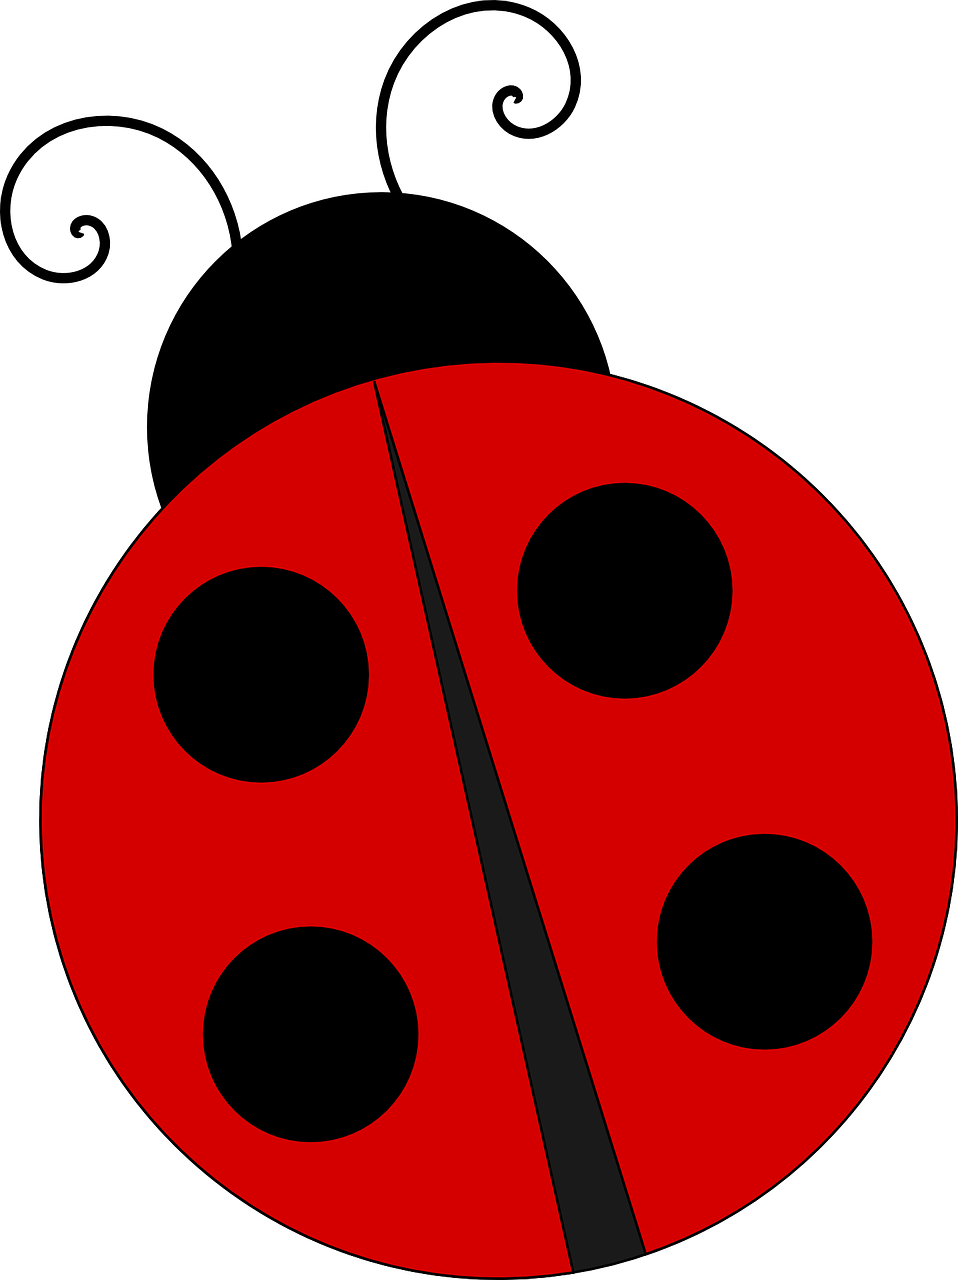 Download PNG image - Vector Ladybug Insect PNG Transparent Image 